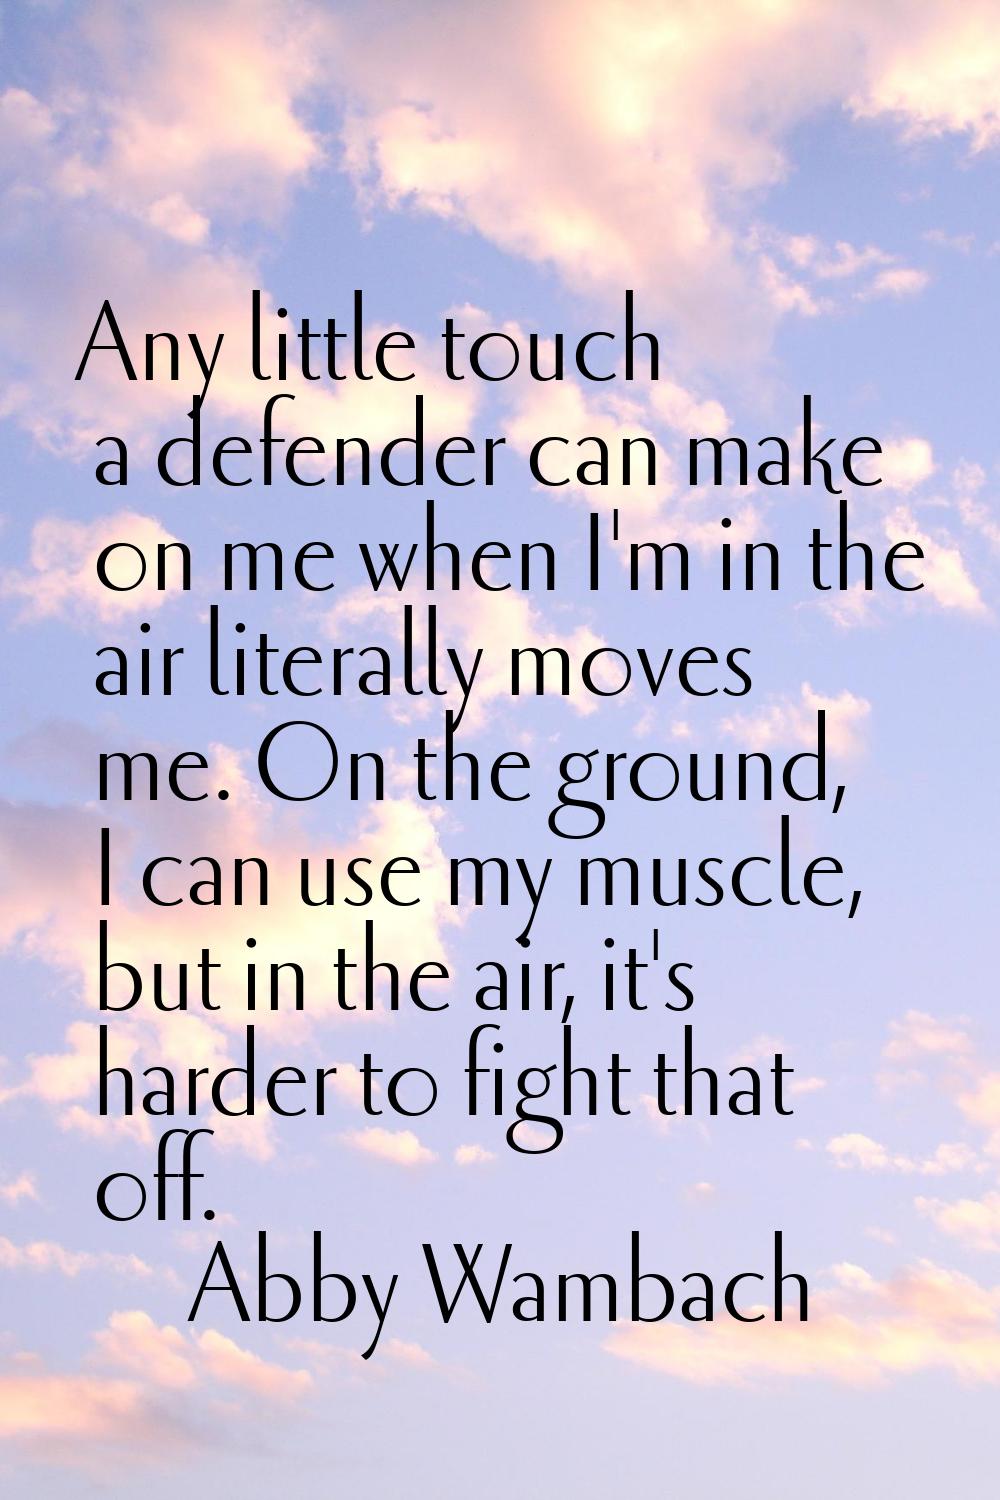 Any little touch a defender can make on me when I'm in the air literally moves me. On the ground, I